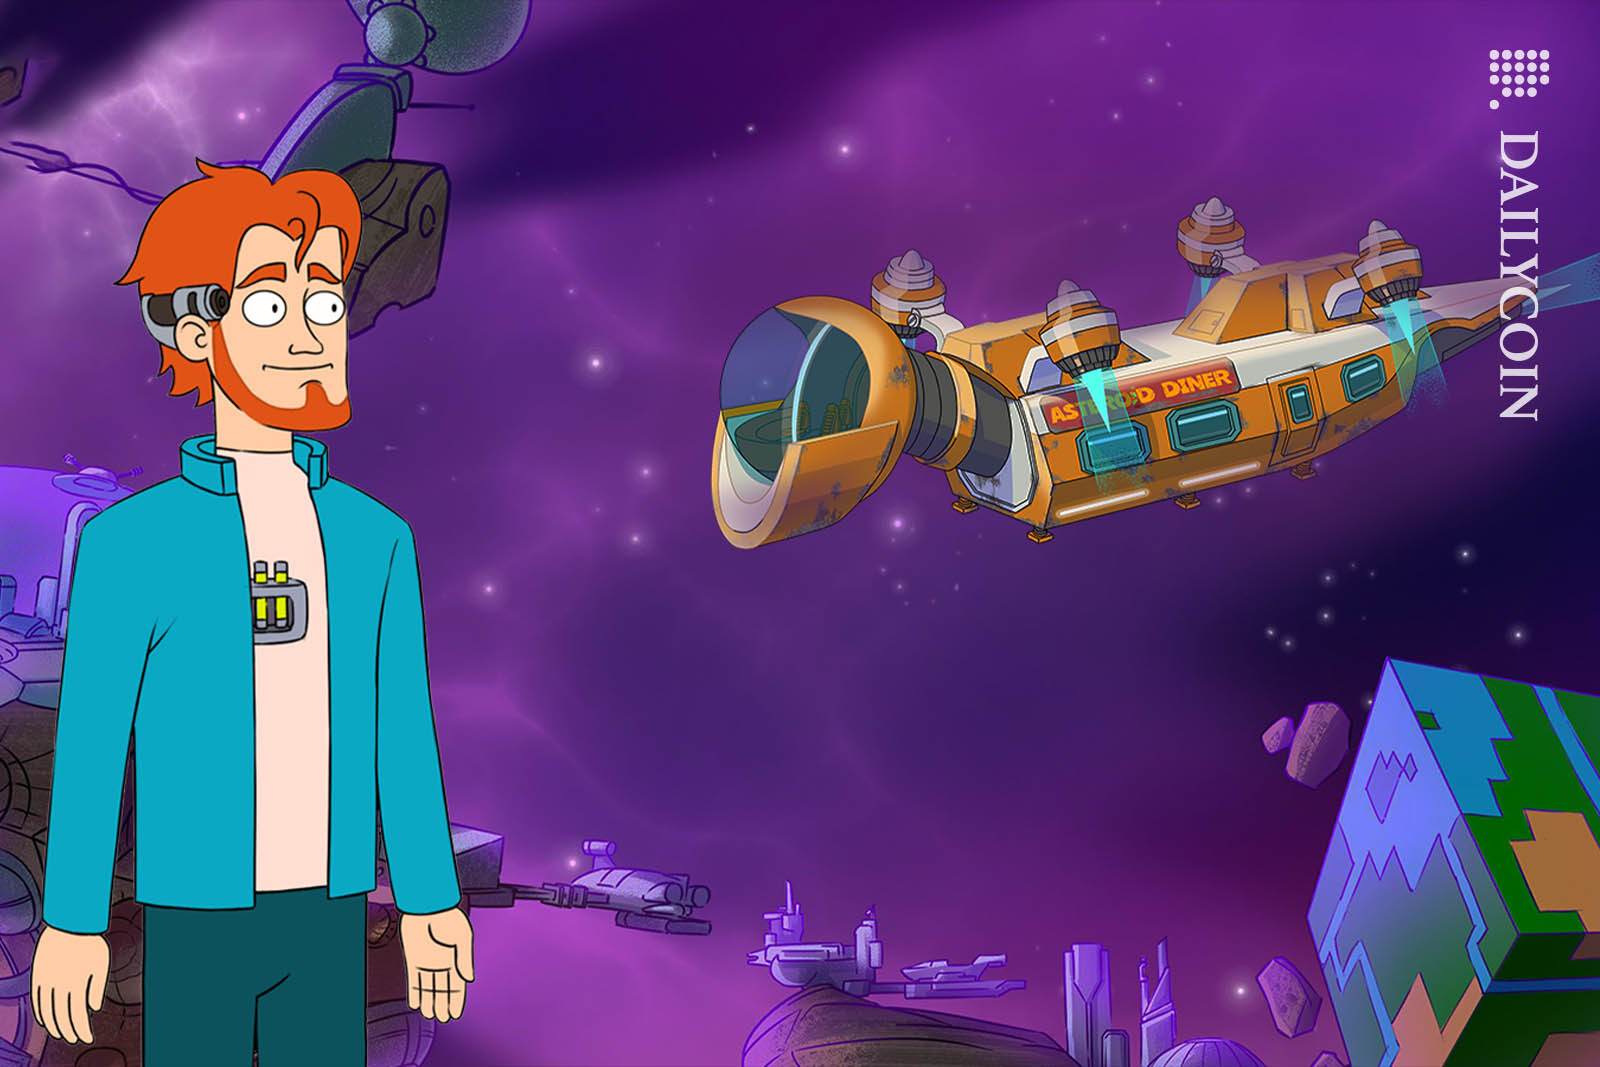 A cartoon man at outer space looking at a spaceship Asteroid Diner.